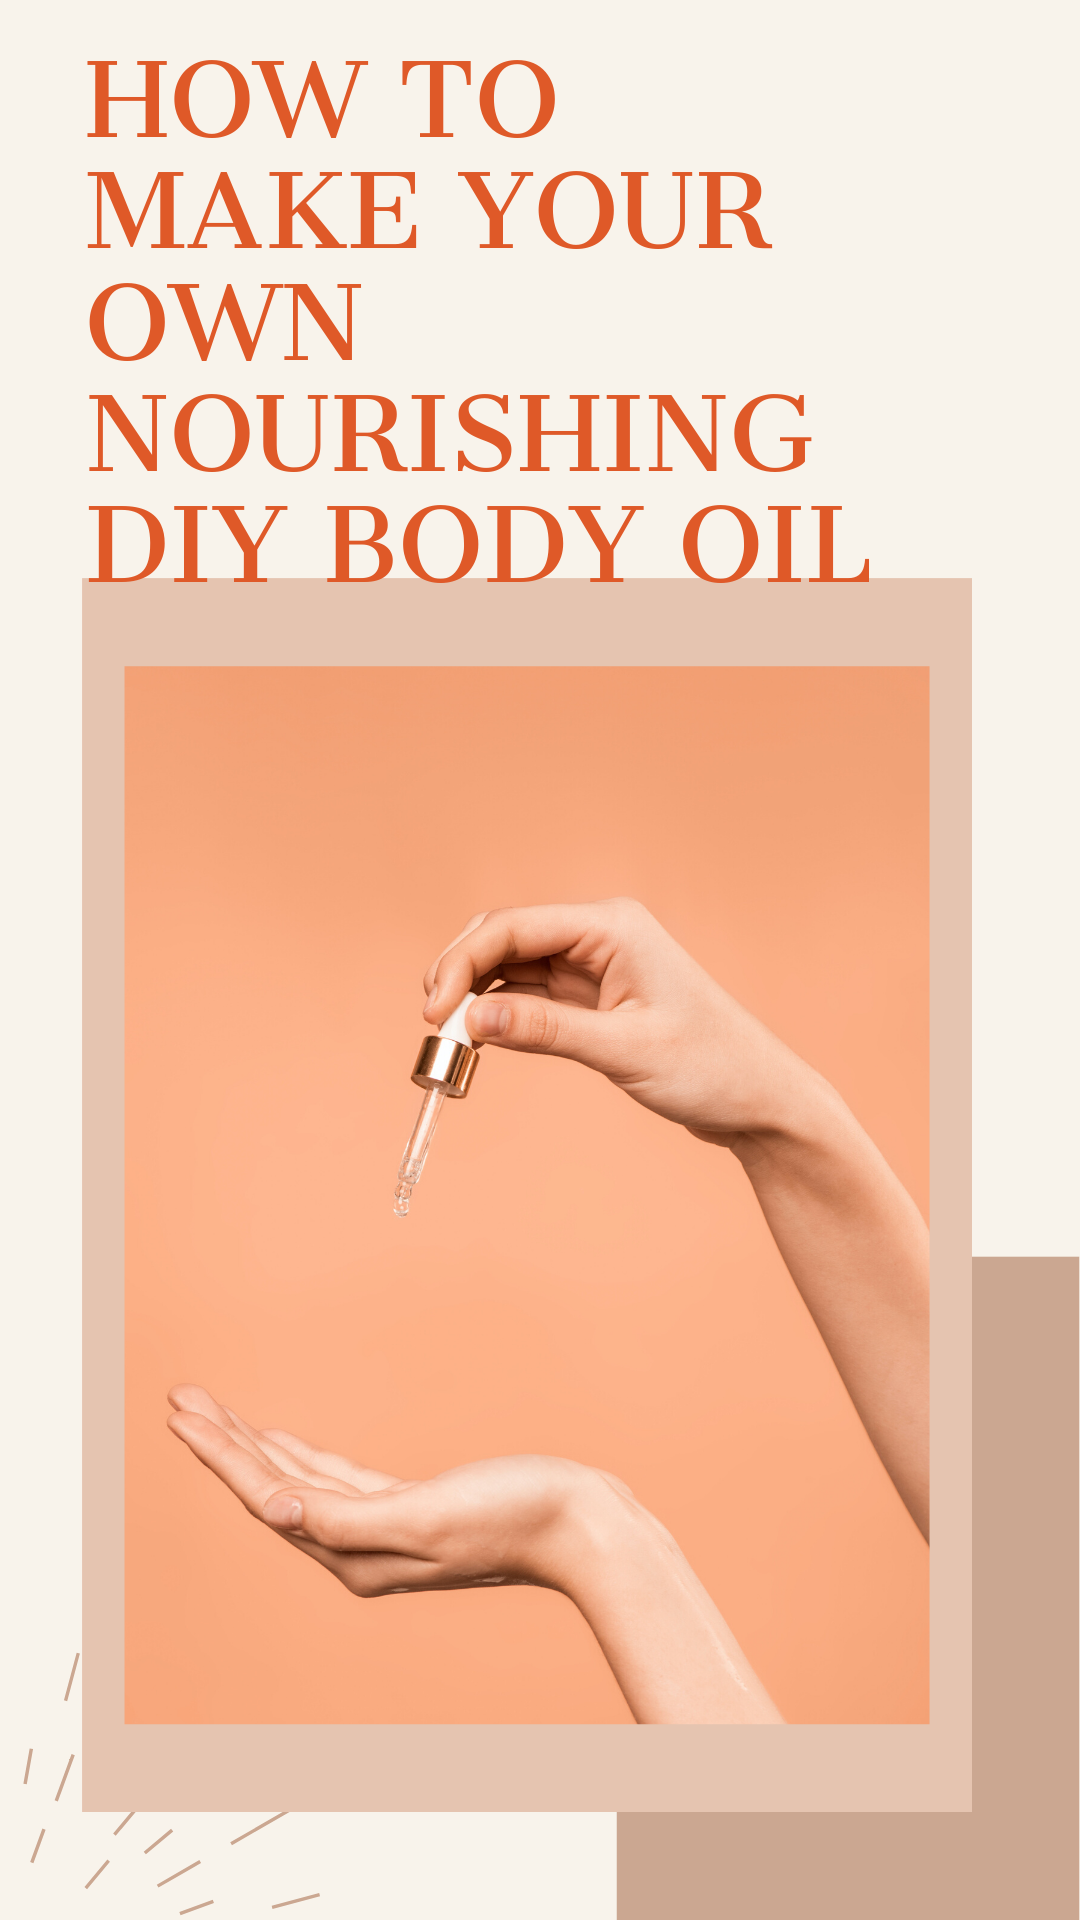 How to Make Your Own Nourishing DIY Body Oil